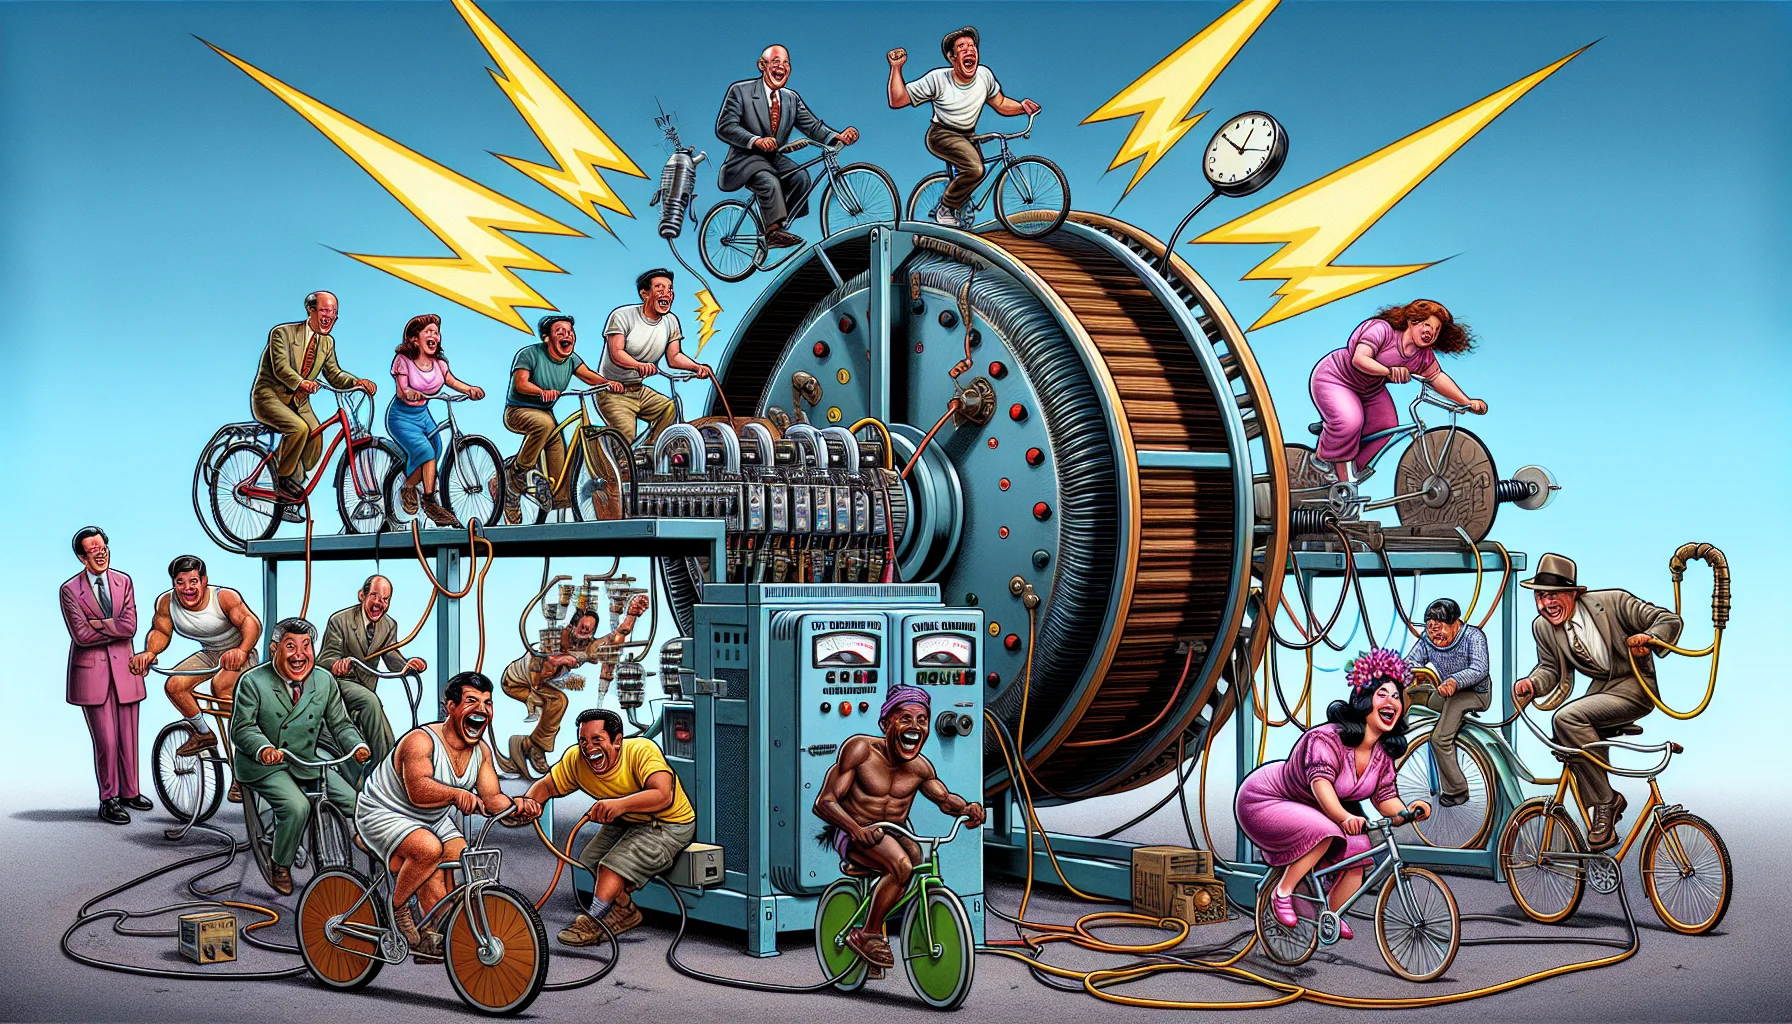 A highly detailed comedic scene featuring an enormous 11,000 Watt power filter ingeniously connected to a range of power-generating items. Picture a giant hamster wheel powered by a group of enthusiastic Middle-Eastern men and Cajun women running in unison, a group of multi-ethnic children gleefully cycling on stationary bikes connected to dynamos, and a South Asian woman and a Hispanic man laughingly trying to operate a giant old-fashioned manual crank together. Cartoonish lightning bolts underline the pure power generated, humorously styled to make electricity generation look exciting and engaging.